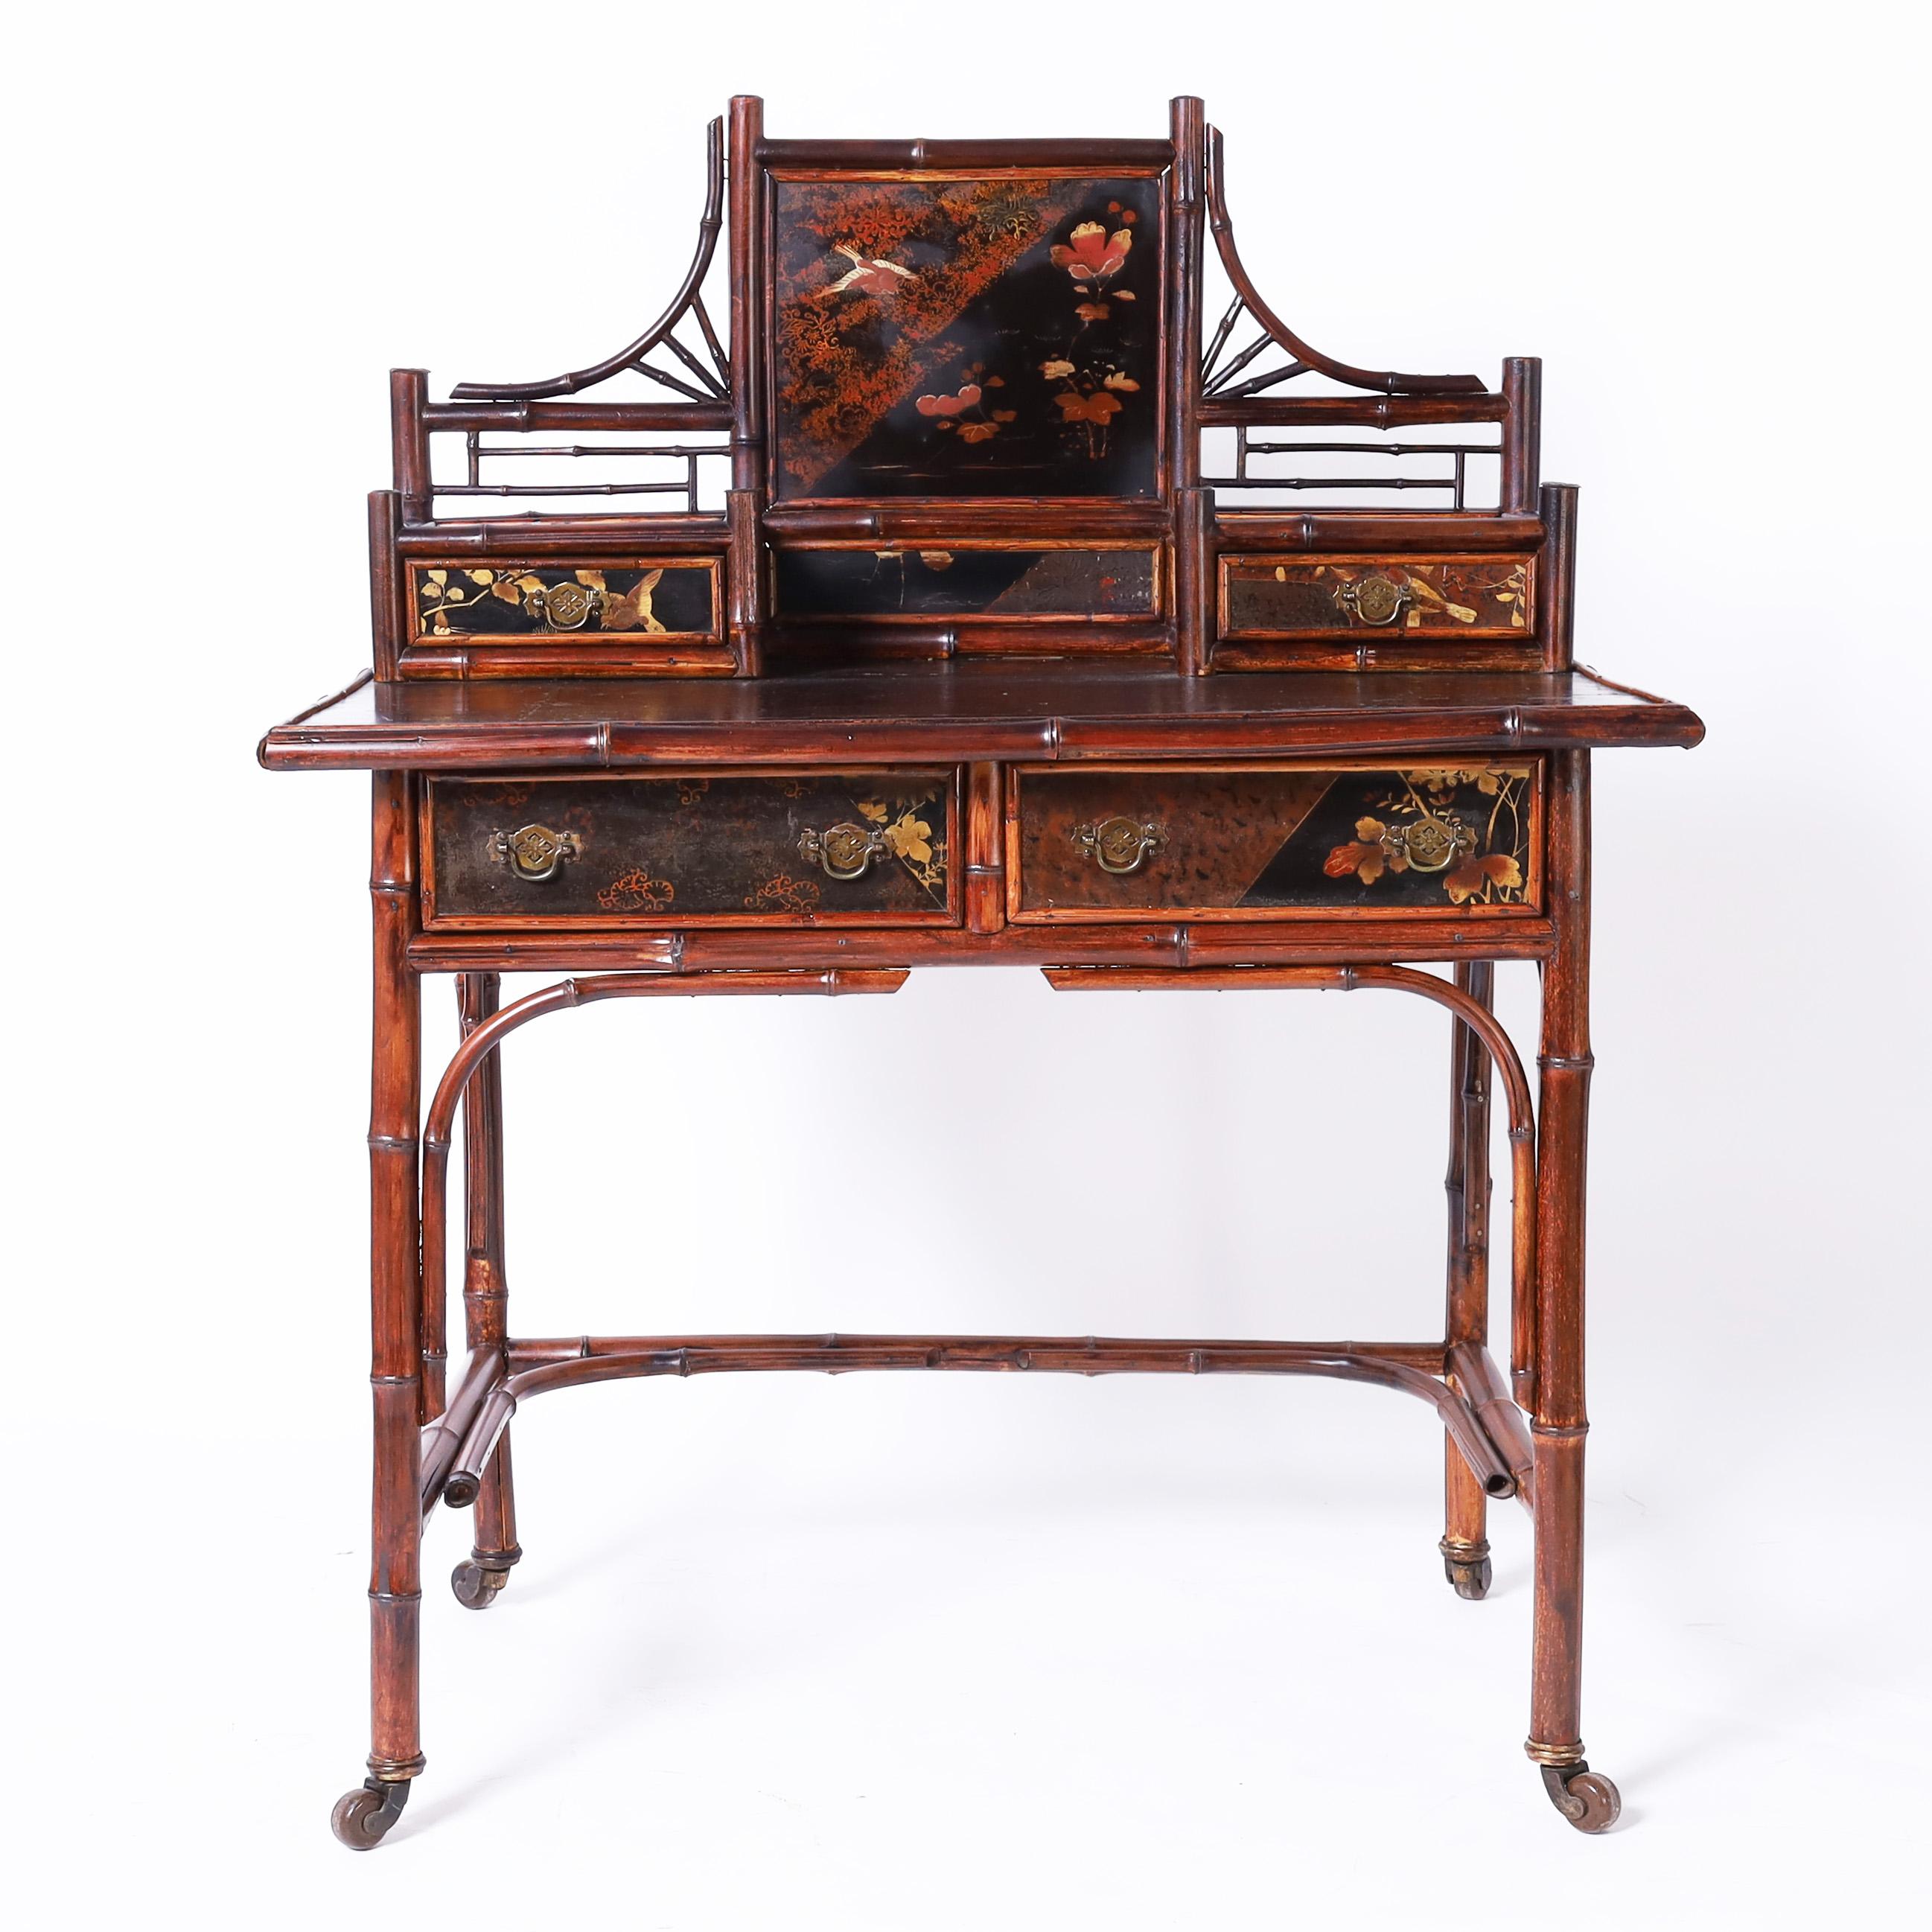 Impressive 19th century English desk handcrafted in bamboo in a Japonisme form featuring lacquered panels hand decorated with flowers and birds, the original brass hardware, leather writing surface and bracketed legs on brass casters with ceramic